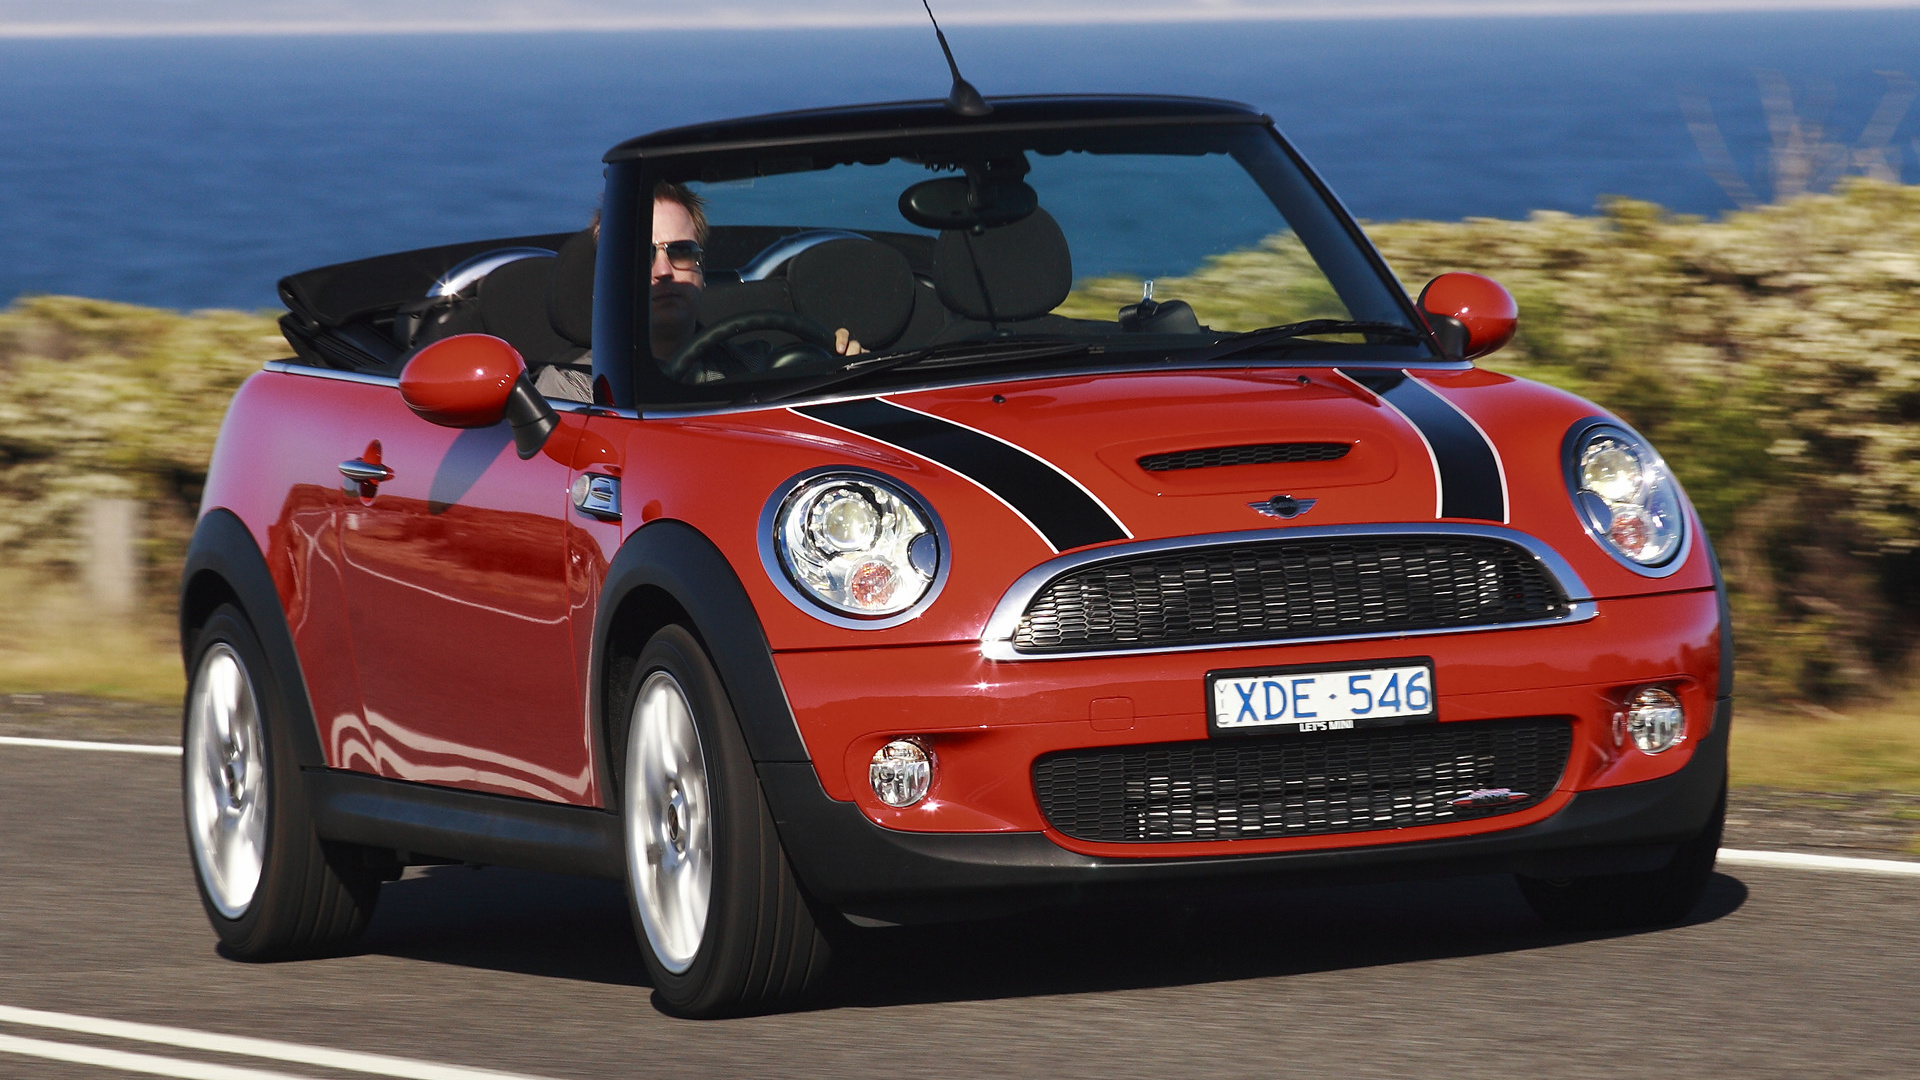 2009 Mini John Cooper Works Convertible (AU) - Wallpapers and HD Images ...